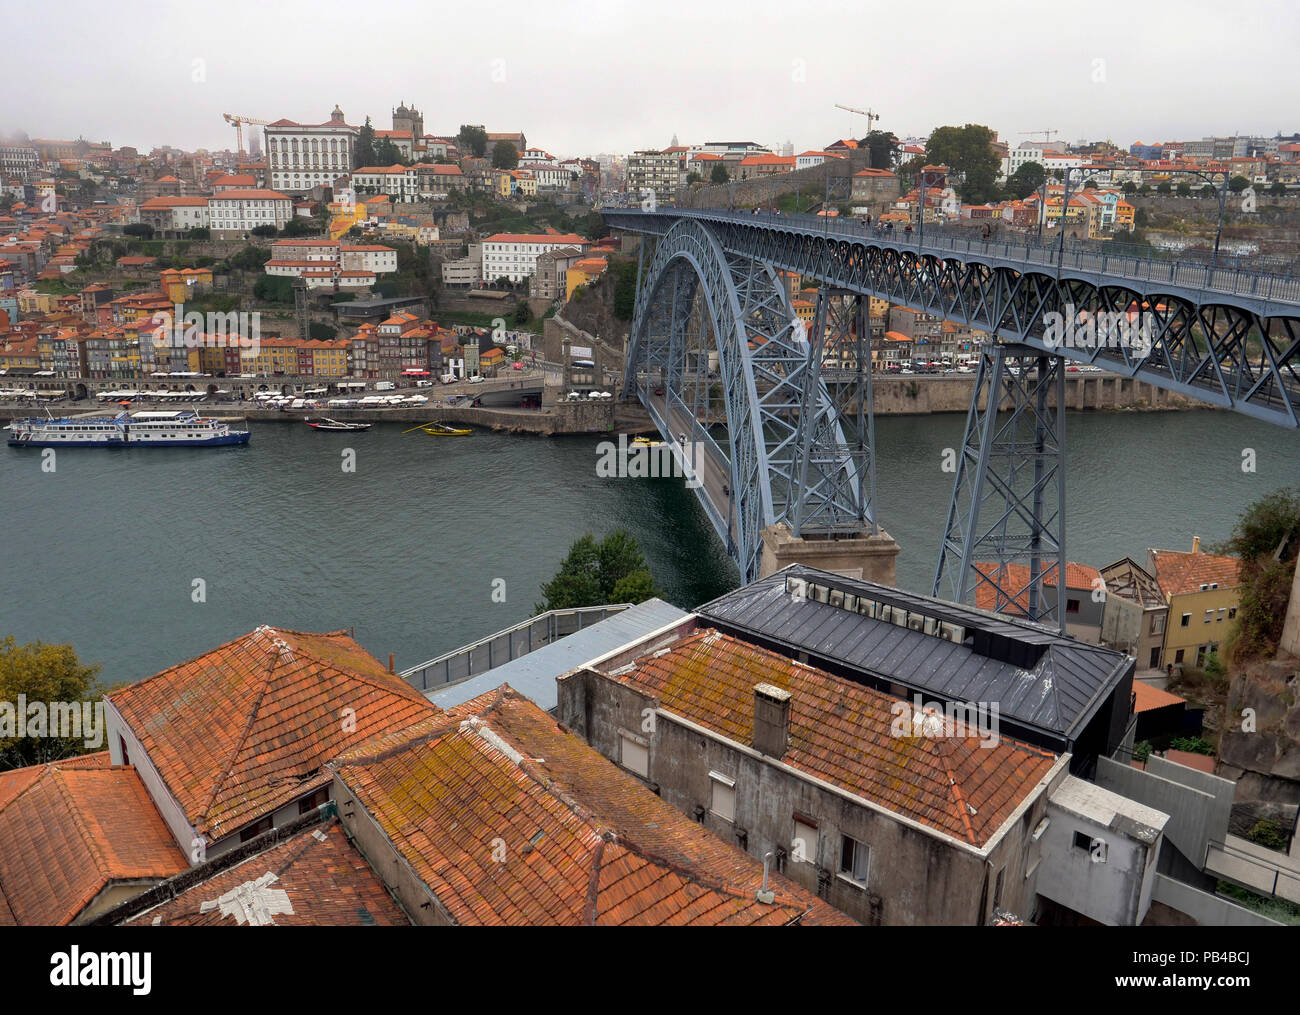 Landmark view of the central Ribeira riverside district of the city of Porto, Portugal, taken from the Dom Luis I Bridge on the River Douro Stock Photo